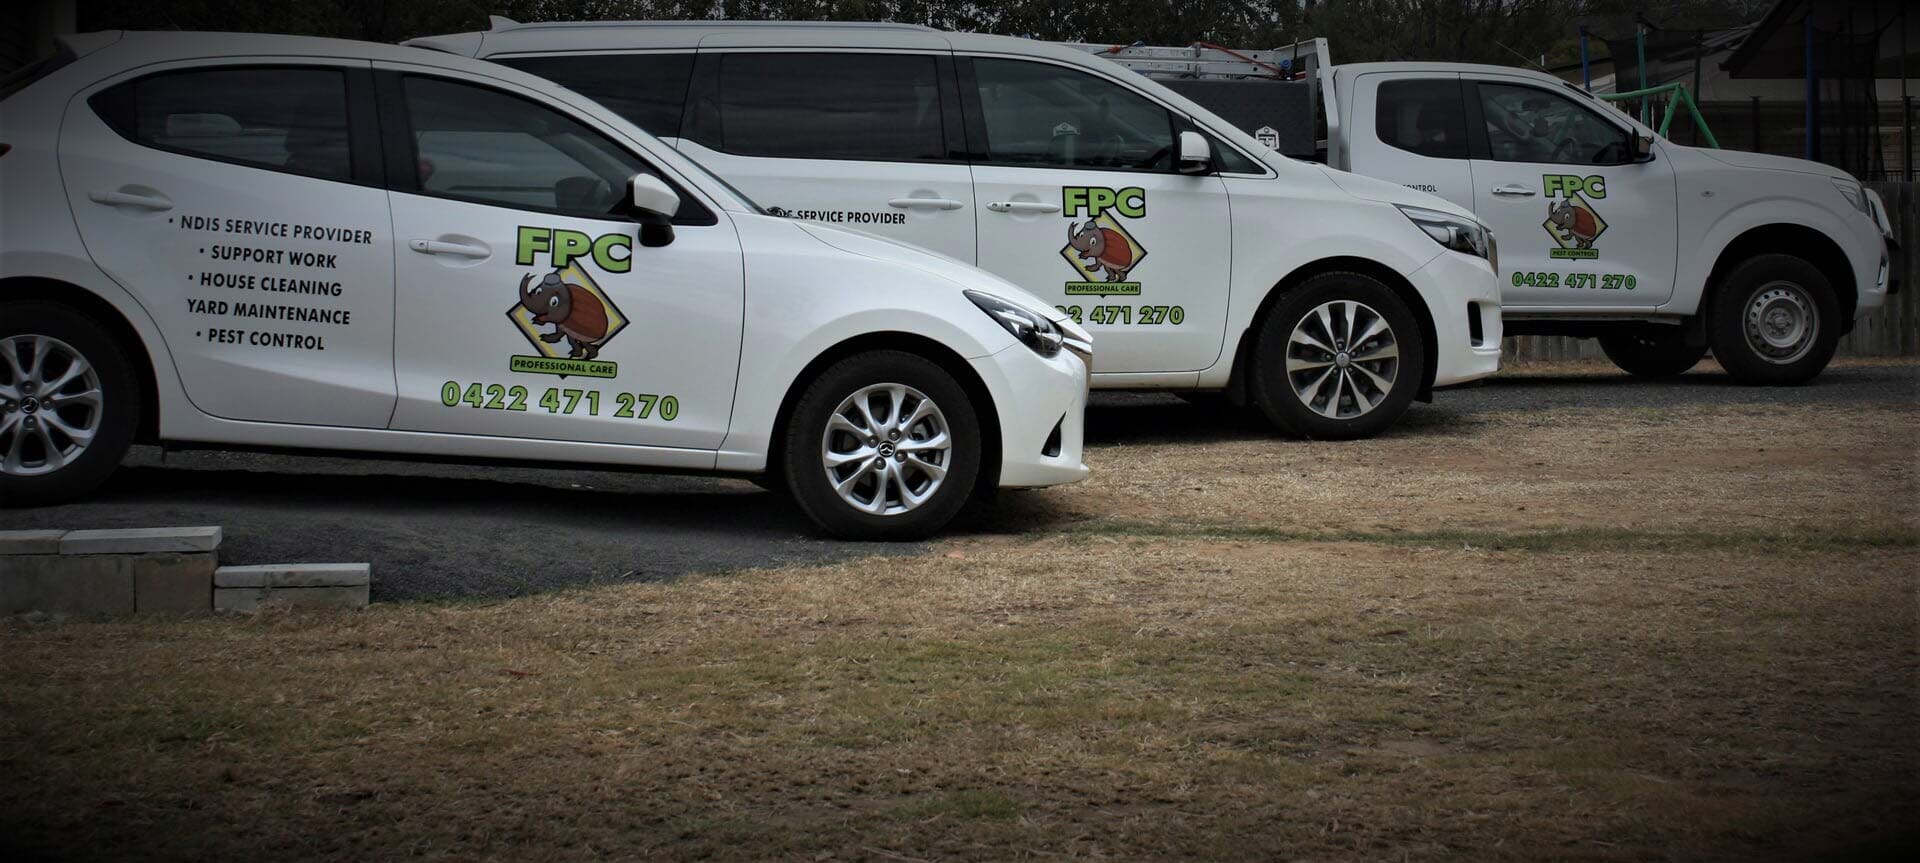 Fezzys pest control branded cars in Ipswich